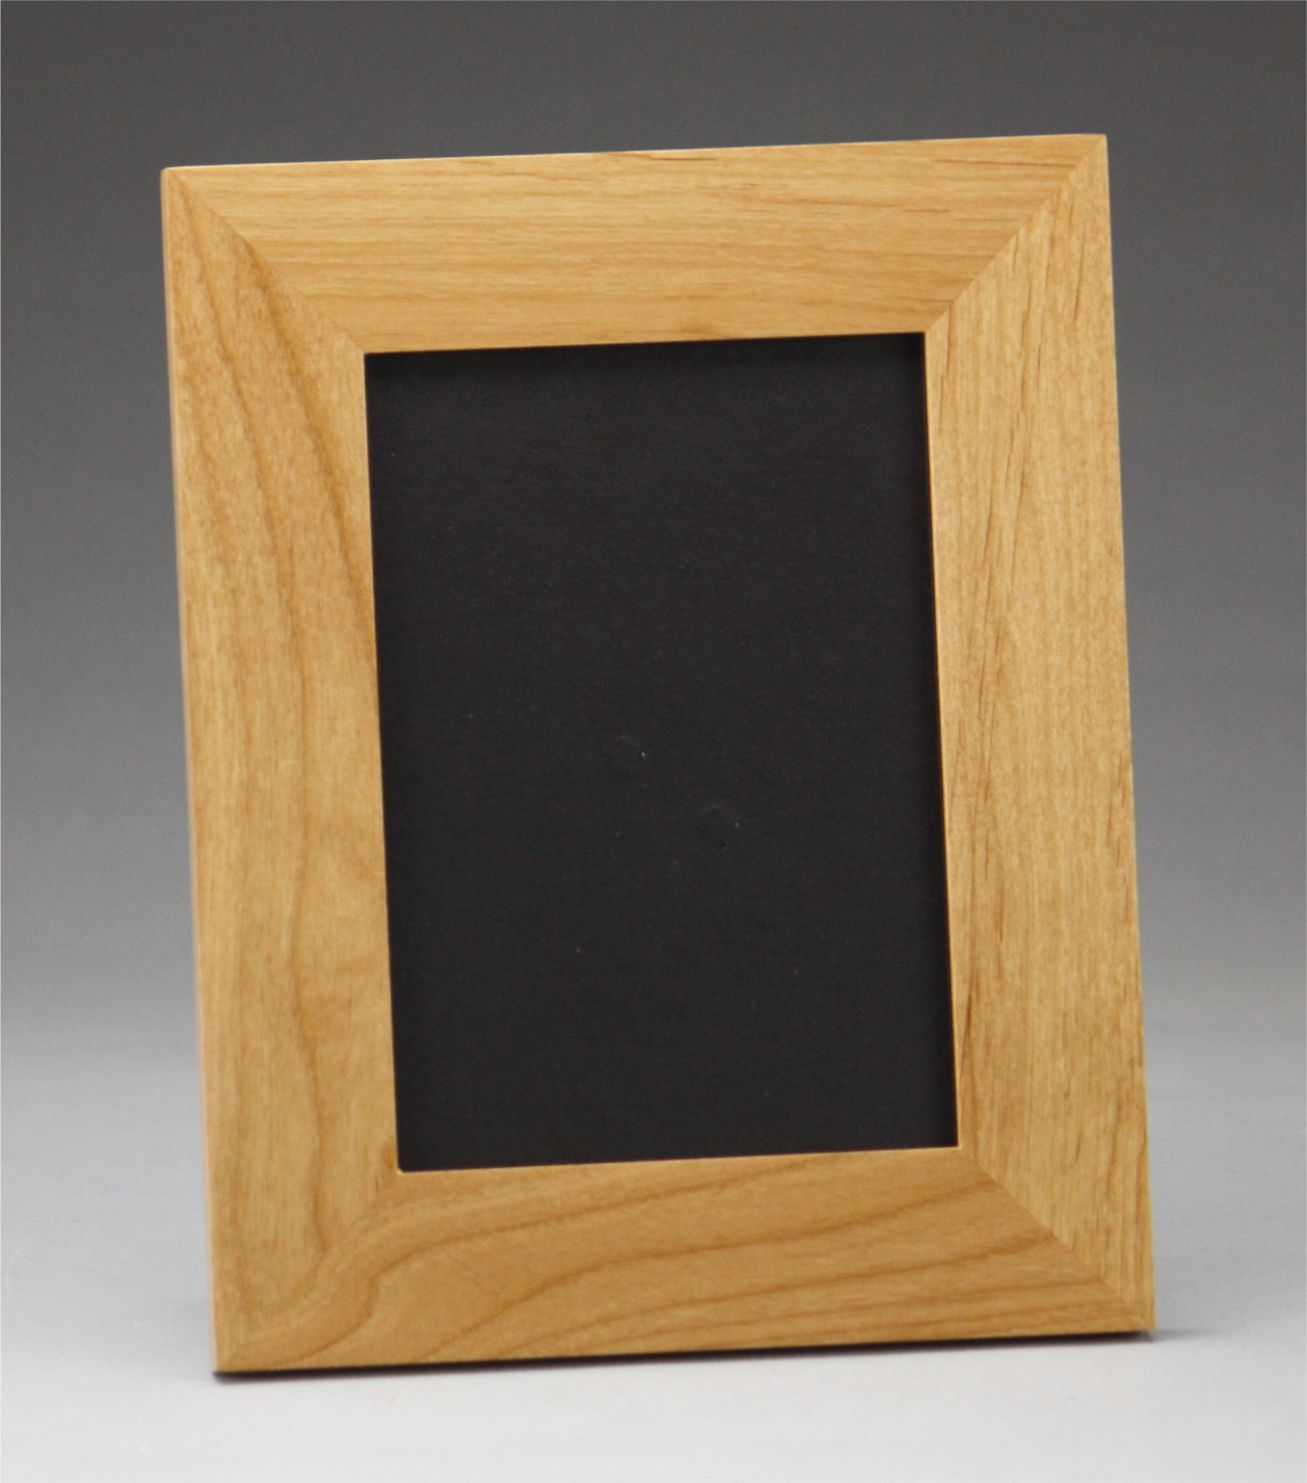 https://www.coloradoheirloom.com/Shared/Images/Product/4-x-6-Picture-Frame/PF_Front_Web.jpg